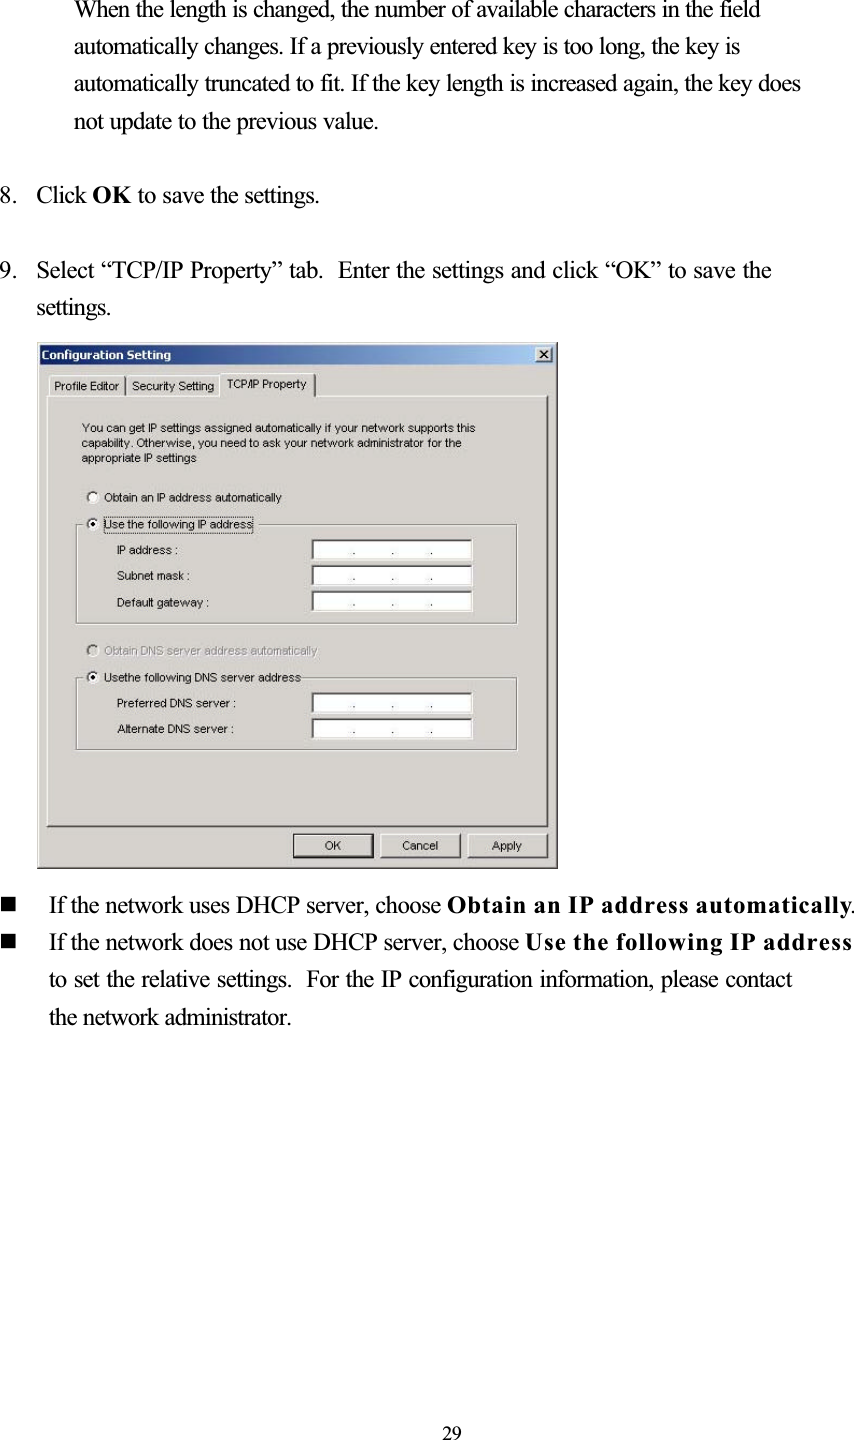 When the length is changed, the number of available characters in the field automatically changes. If a previously entered key is too long, the key is automatically truncated to fit. If the key length is increased again, the key does not update to the previous value. 8. Click OK to save the settings. 9. Select “TCP/IP Property” tab.  Enter the settings and click “OK” to save the settings.  If the network uses DHCP server, choose Obtain an IP address automatically.  If the network does not use DHCP server, choose Use the following IP addressto set the relative settings.  For the IP configuration information, please contact the network administrator. 29